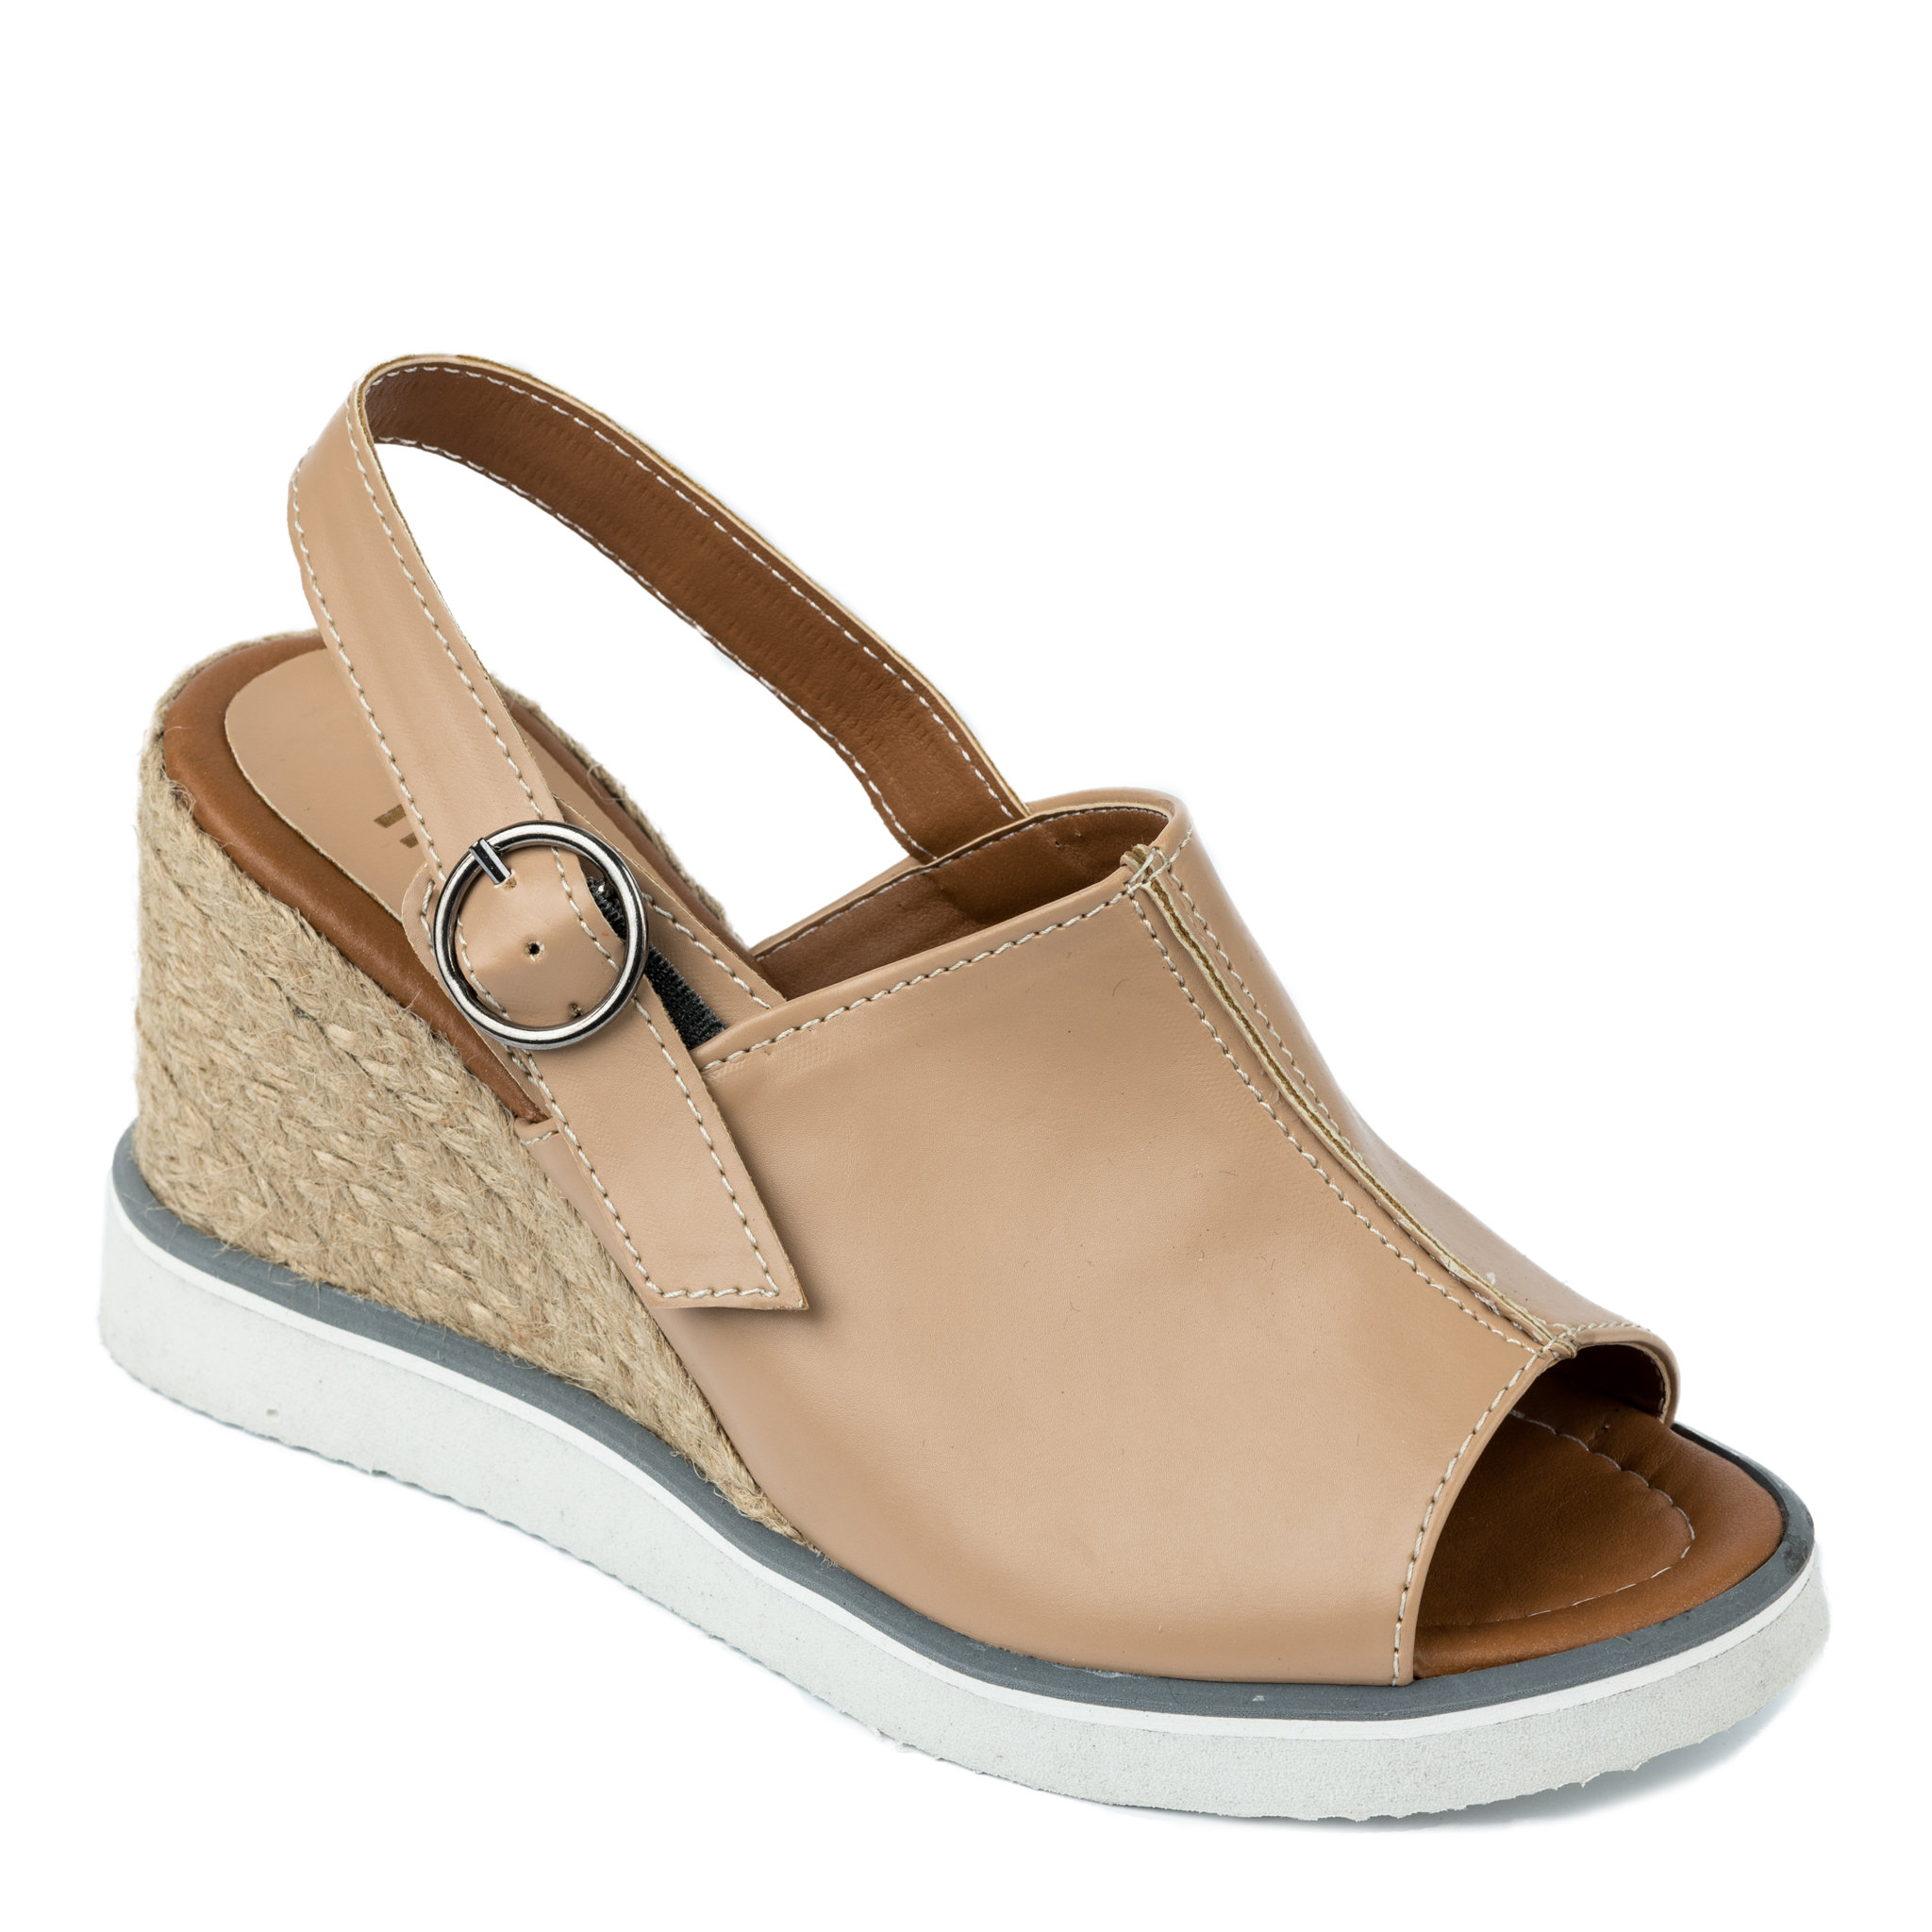 WEDGE SANDALS WITH JUTA AND SAW - BEIGE